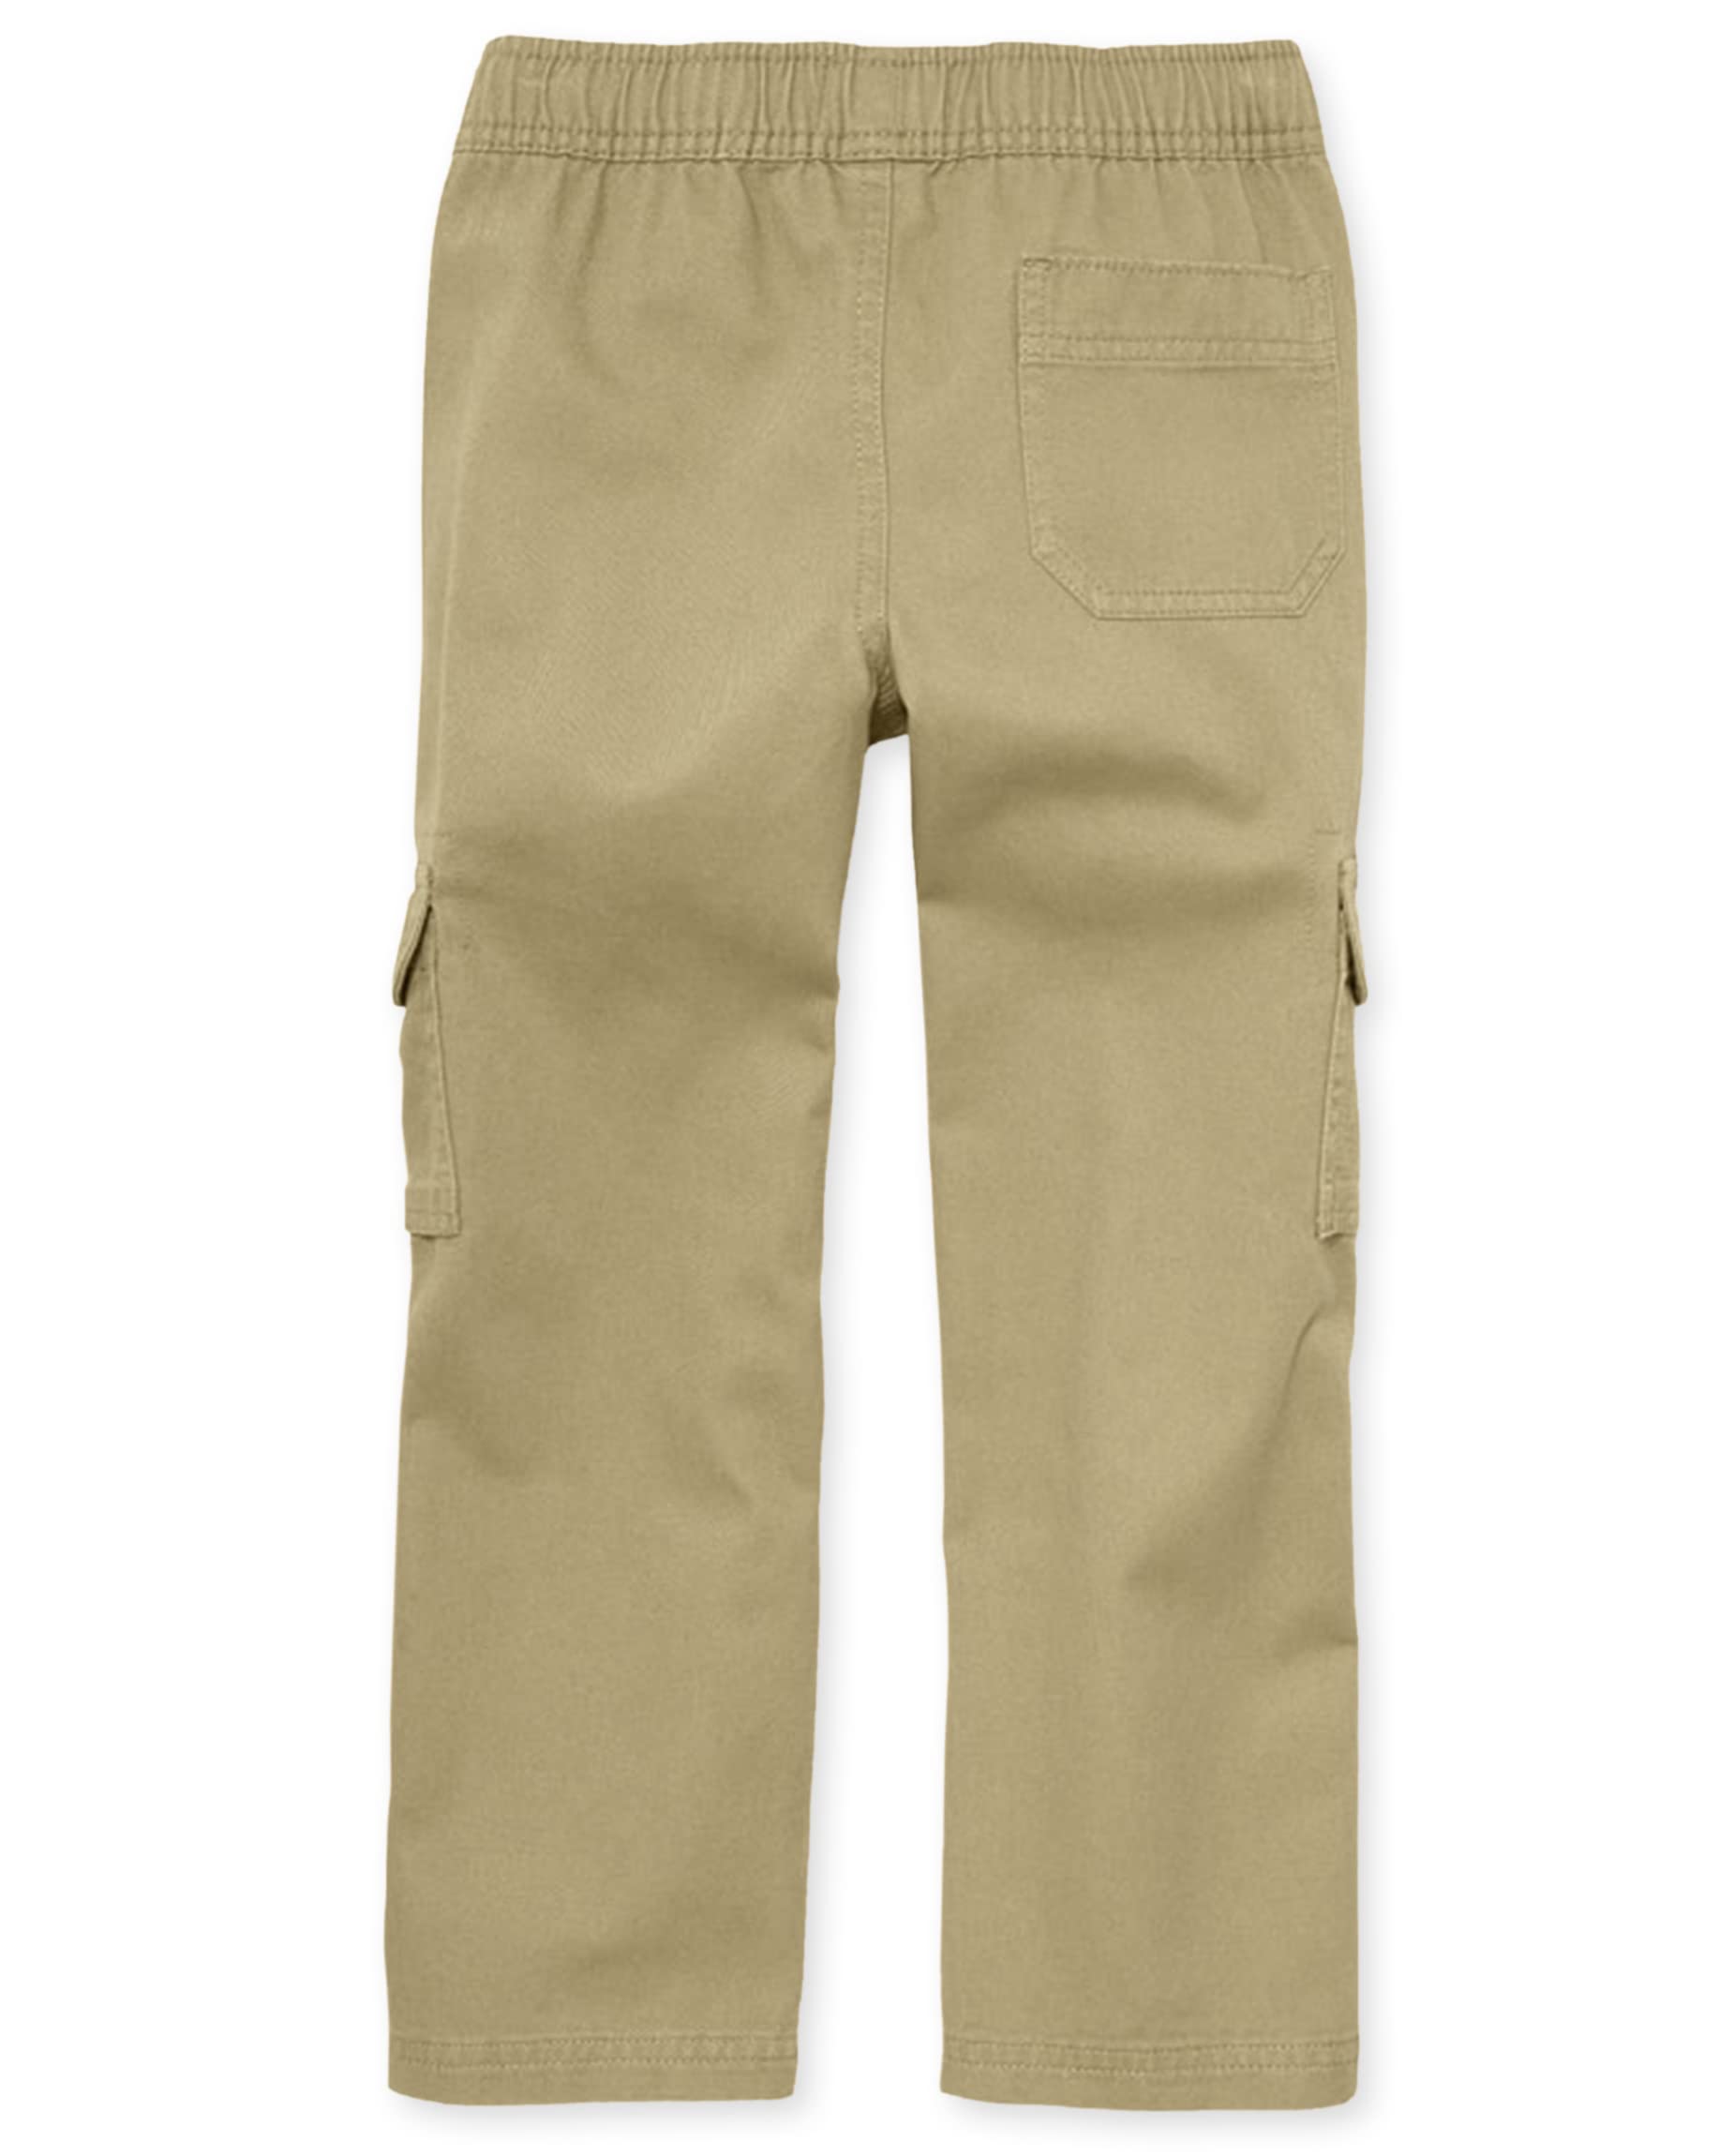 The Children's Place Boys' Slim Pull on Cargo Pants 4 Pack